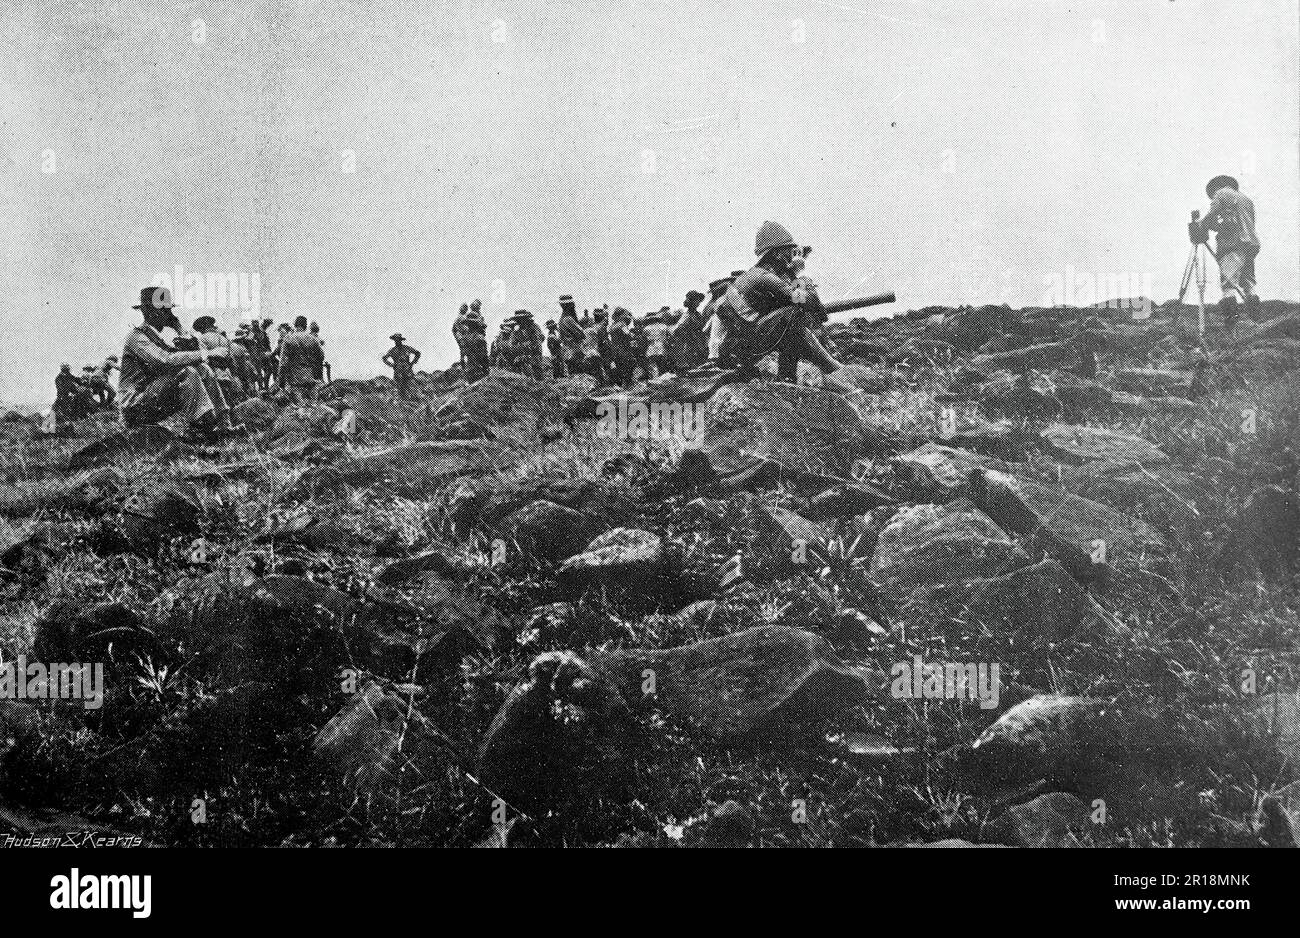 The Boer War, also known as the Second Boer War, The South African War and The Anglo-Boer War. This image shows: Watching a Battle: War correspondents looking on at Colenso. Original photo by “Watkin”, c1899. Stock Photo